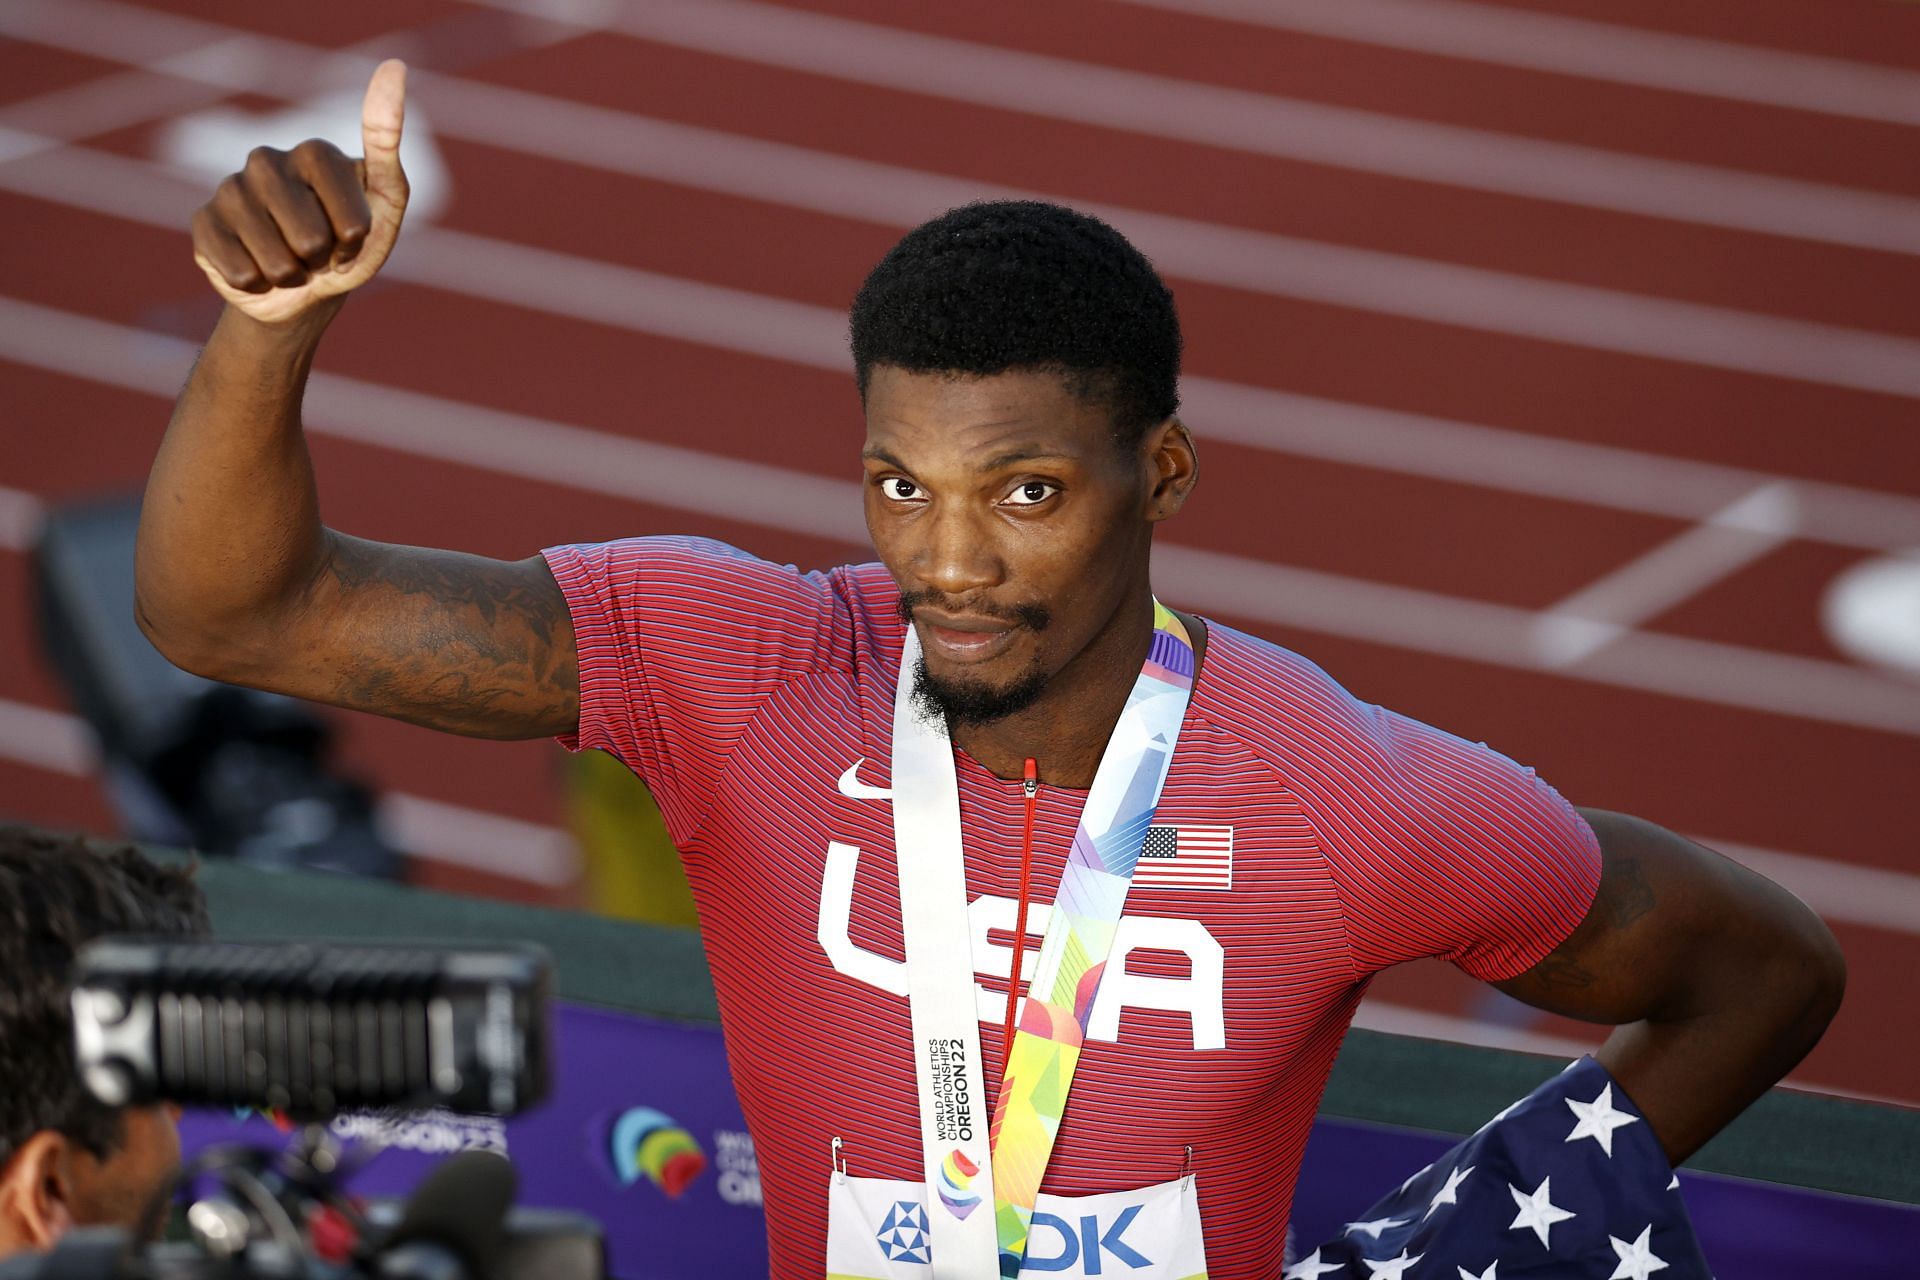 Fred Kerley celebrates after winning gold in the Men&rsquo;s 100m Final at the 2022 World Athletics Championships in Eugene, Oregon.